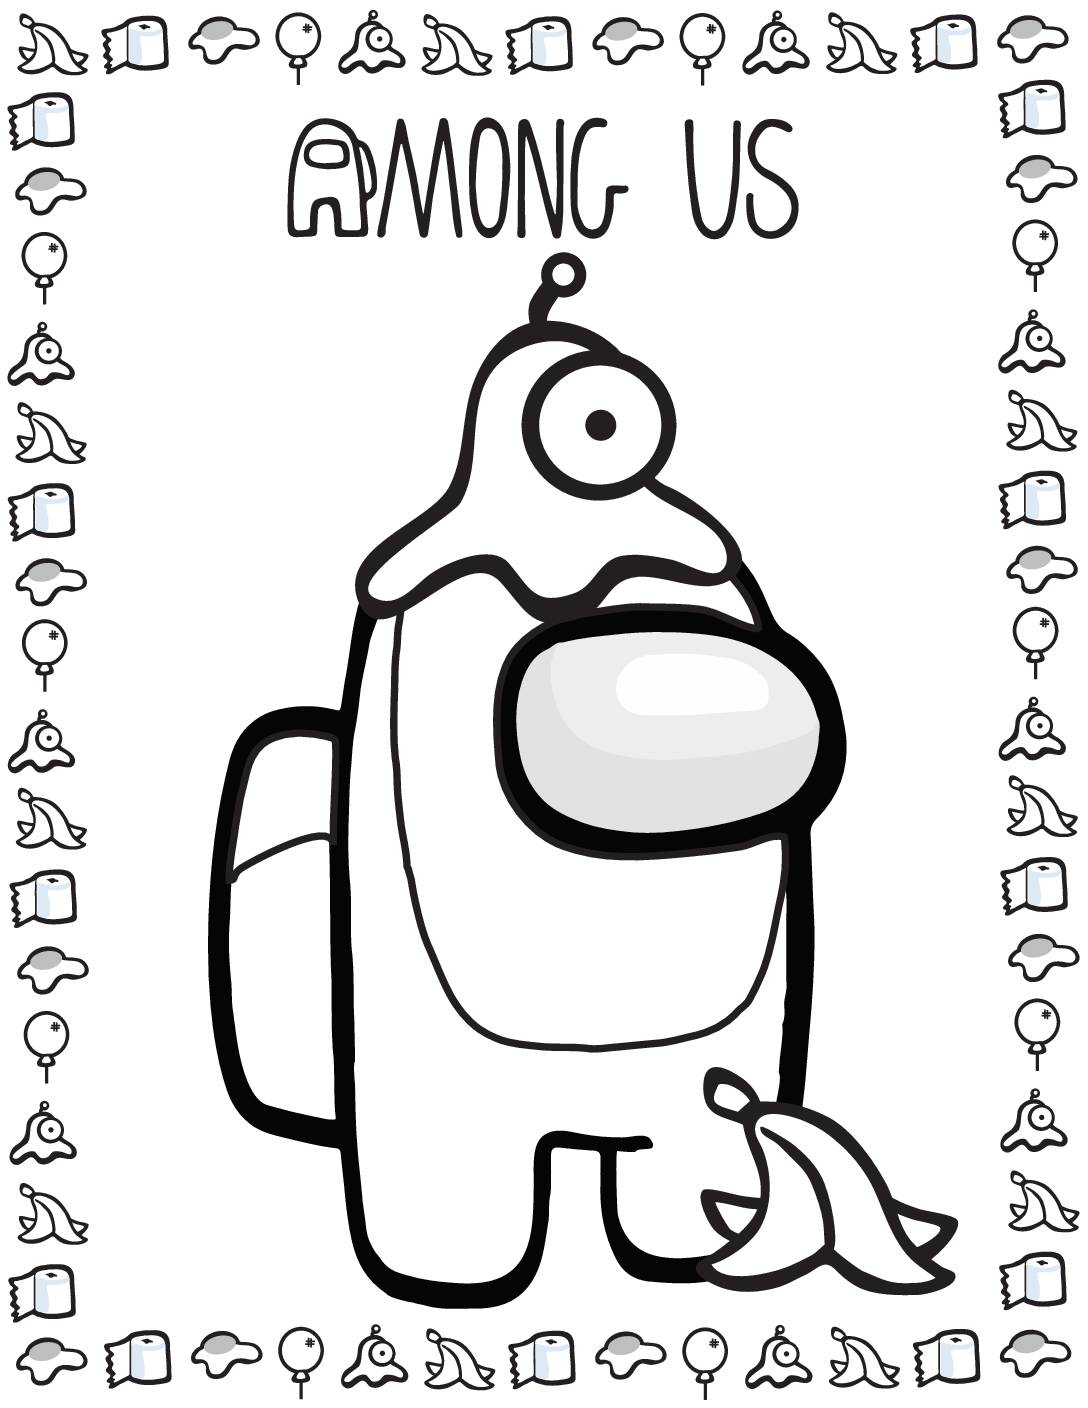 Coloring Page 5 Among US